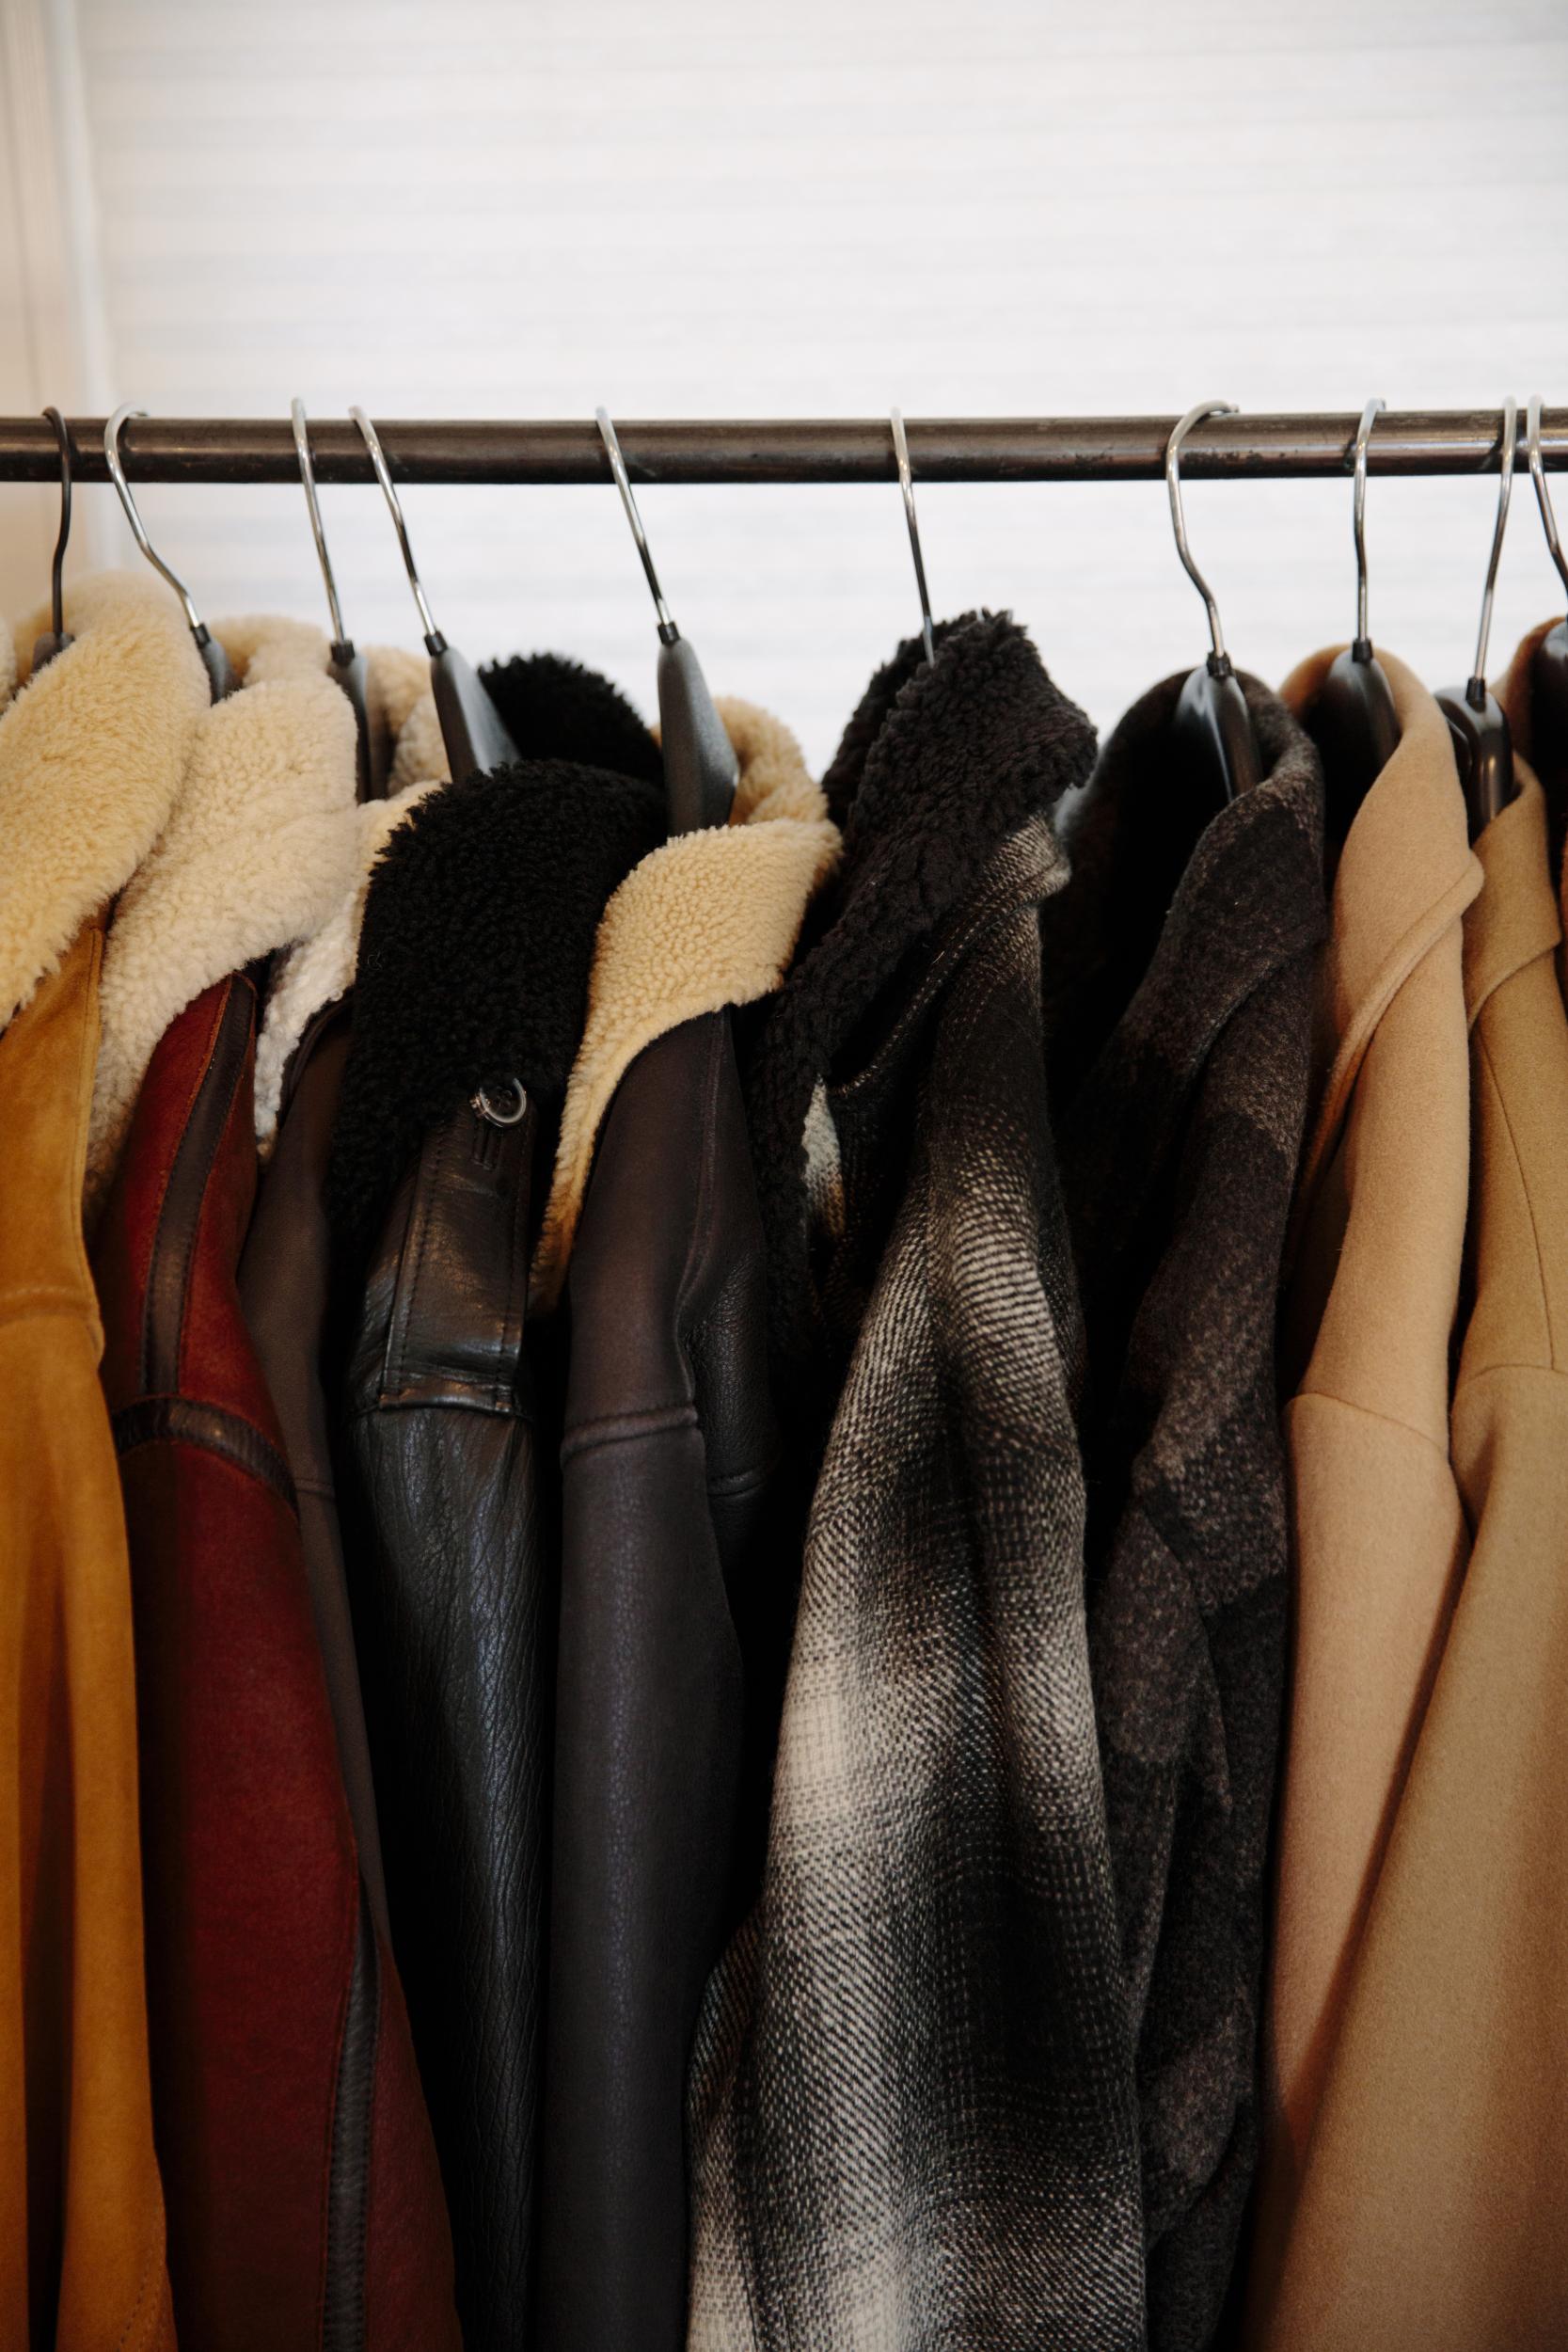 New jackets hang in Ilaria Urbinati's studio awaiting a client. (Photo for The Washington Post by Brinson+Banks)